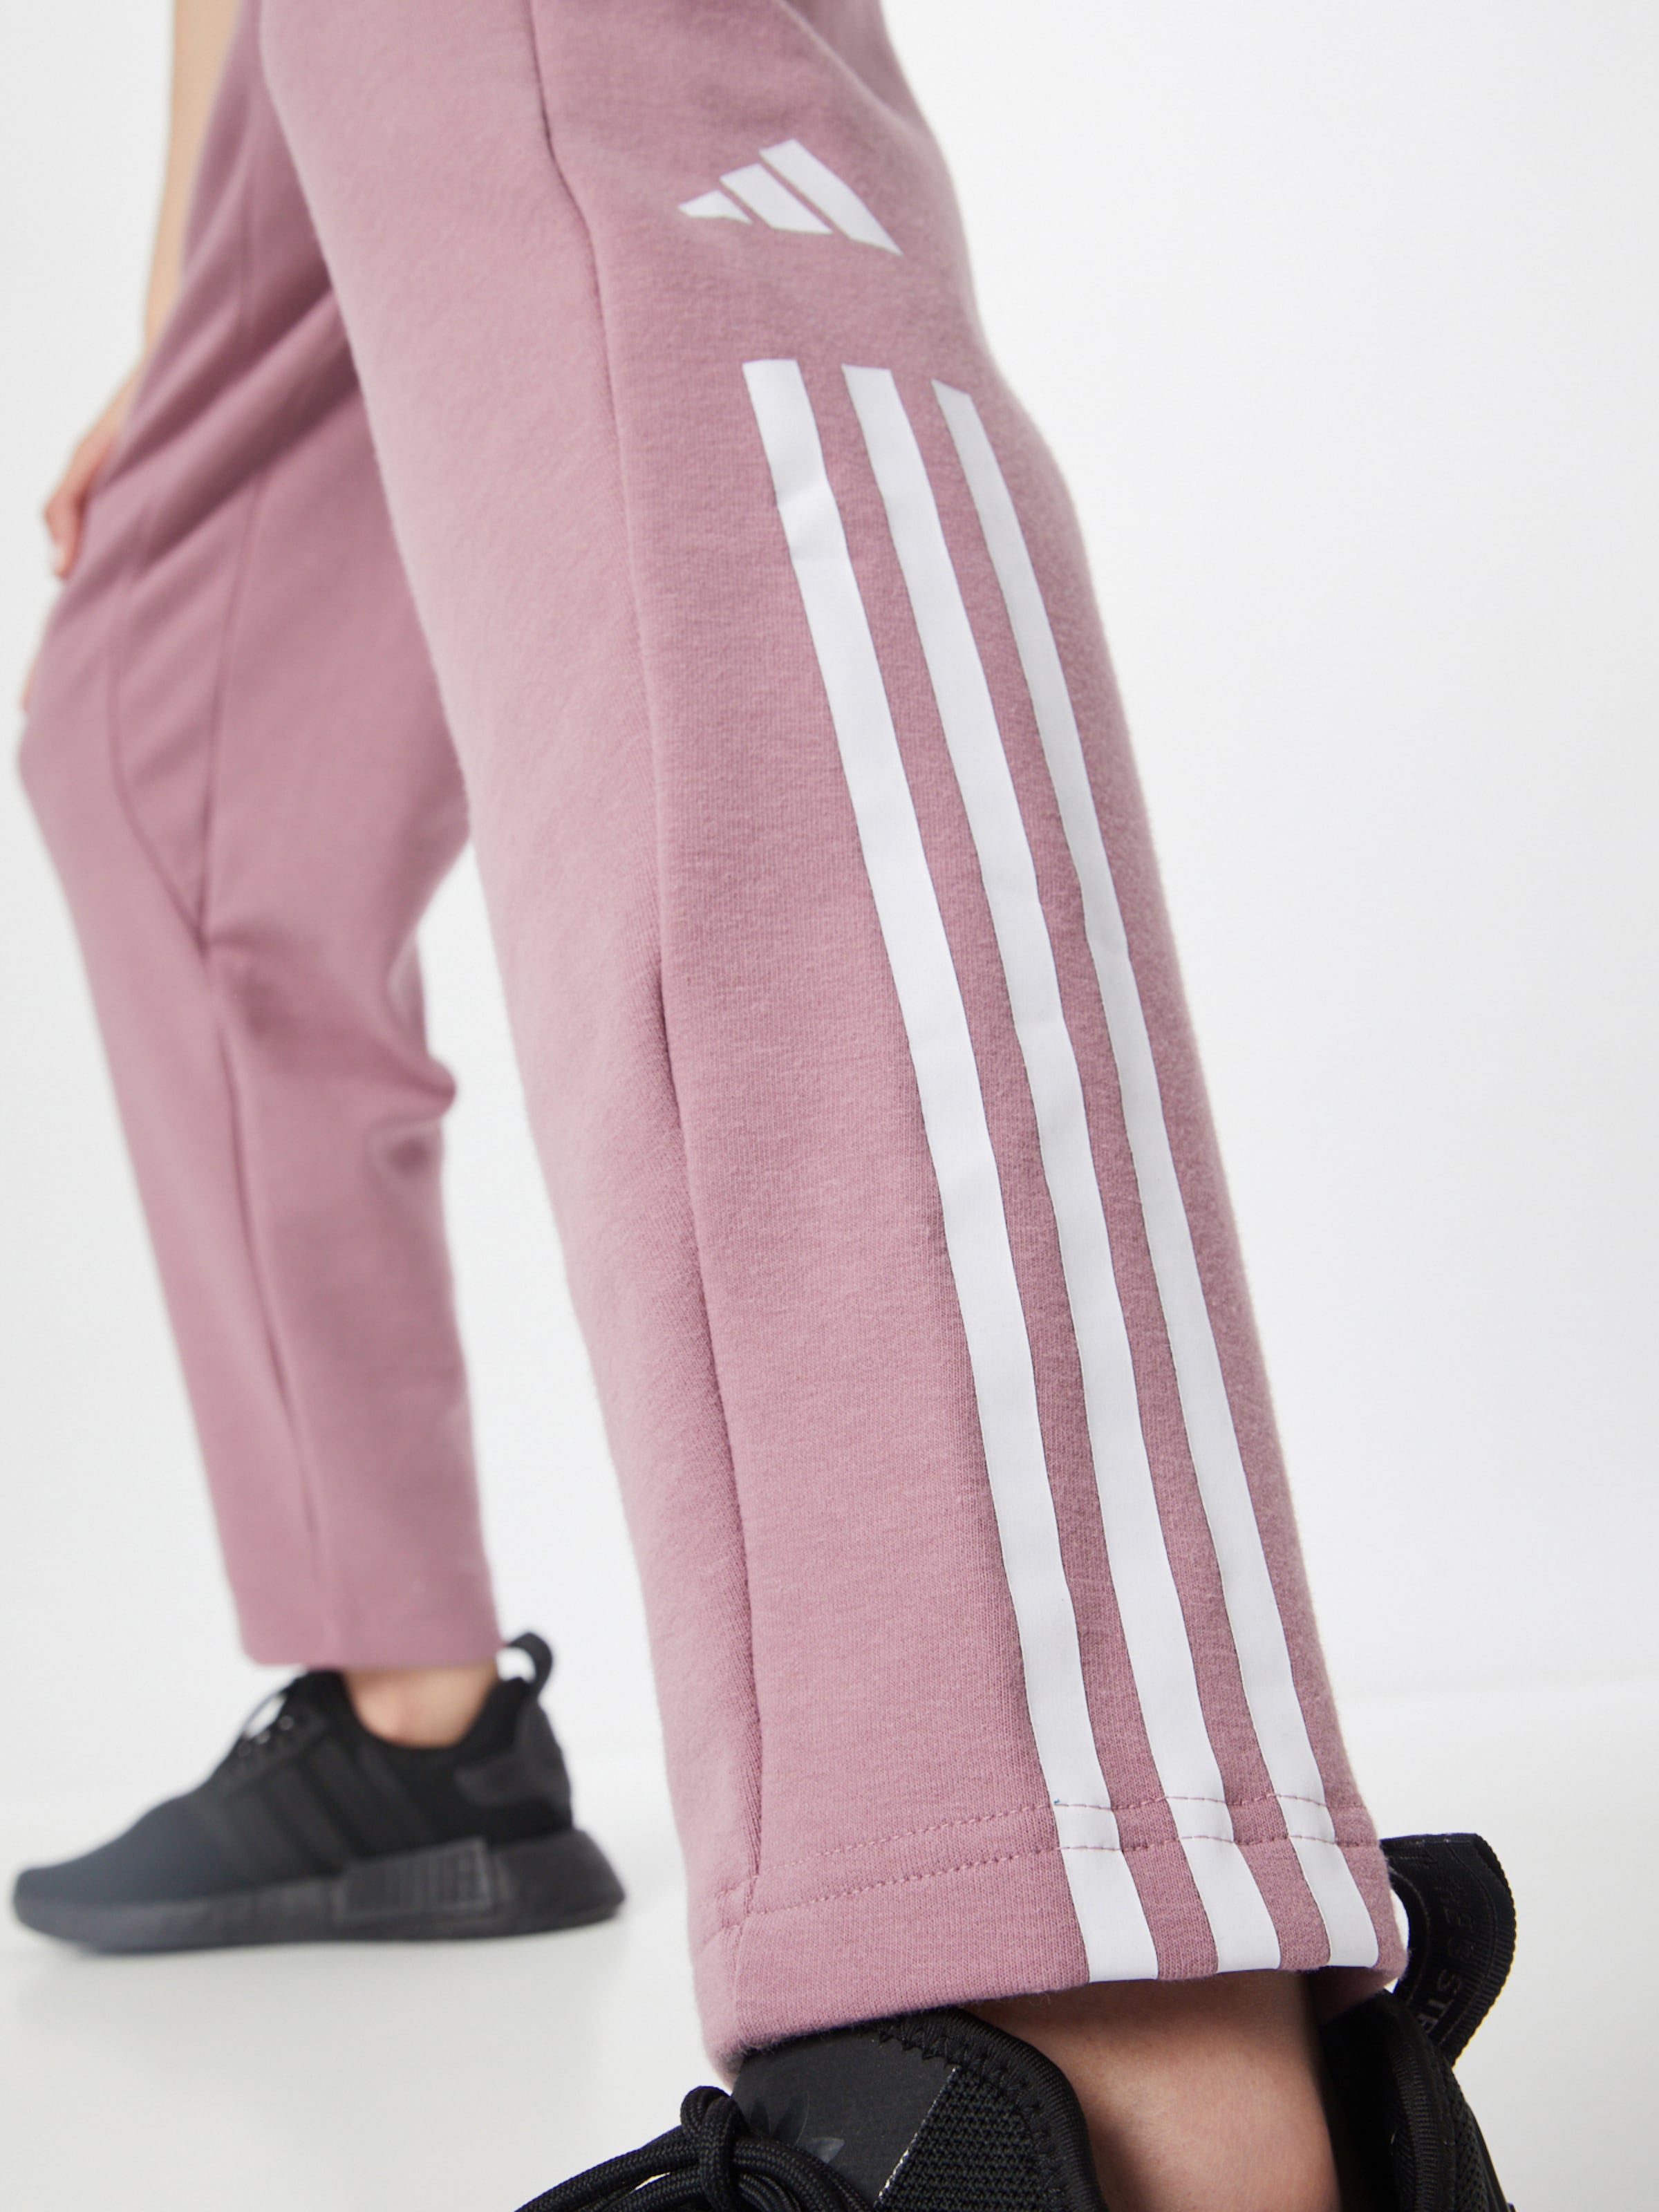 PERFORMANCE \'Train ADIDAS ABOUT Loose fit \' YOU | Workout in Pants Orchid Essentials-Fit